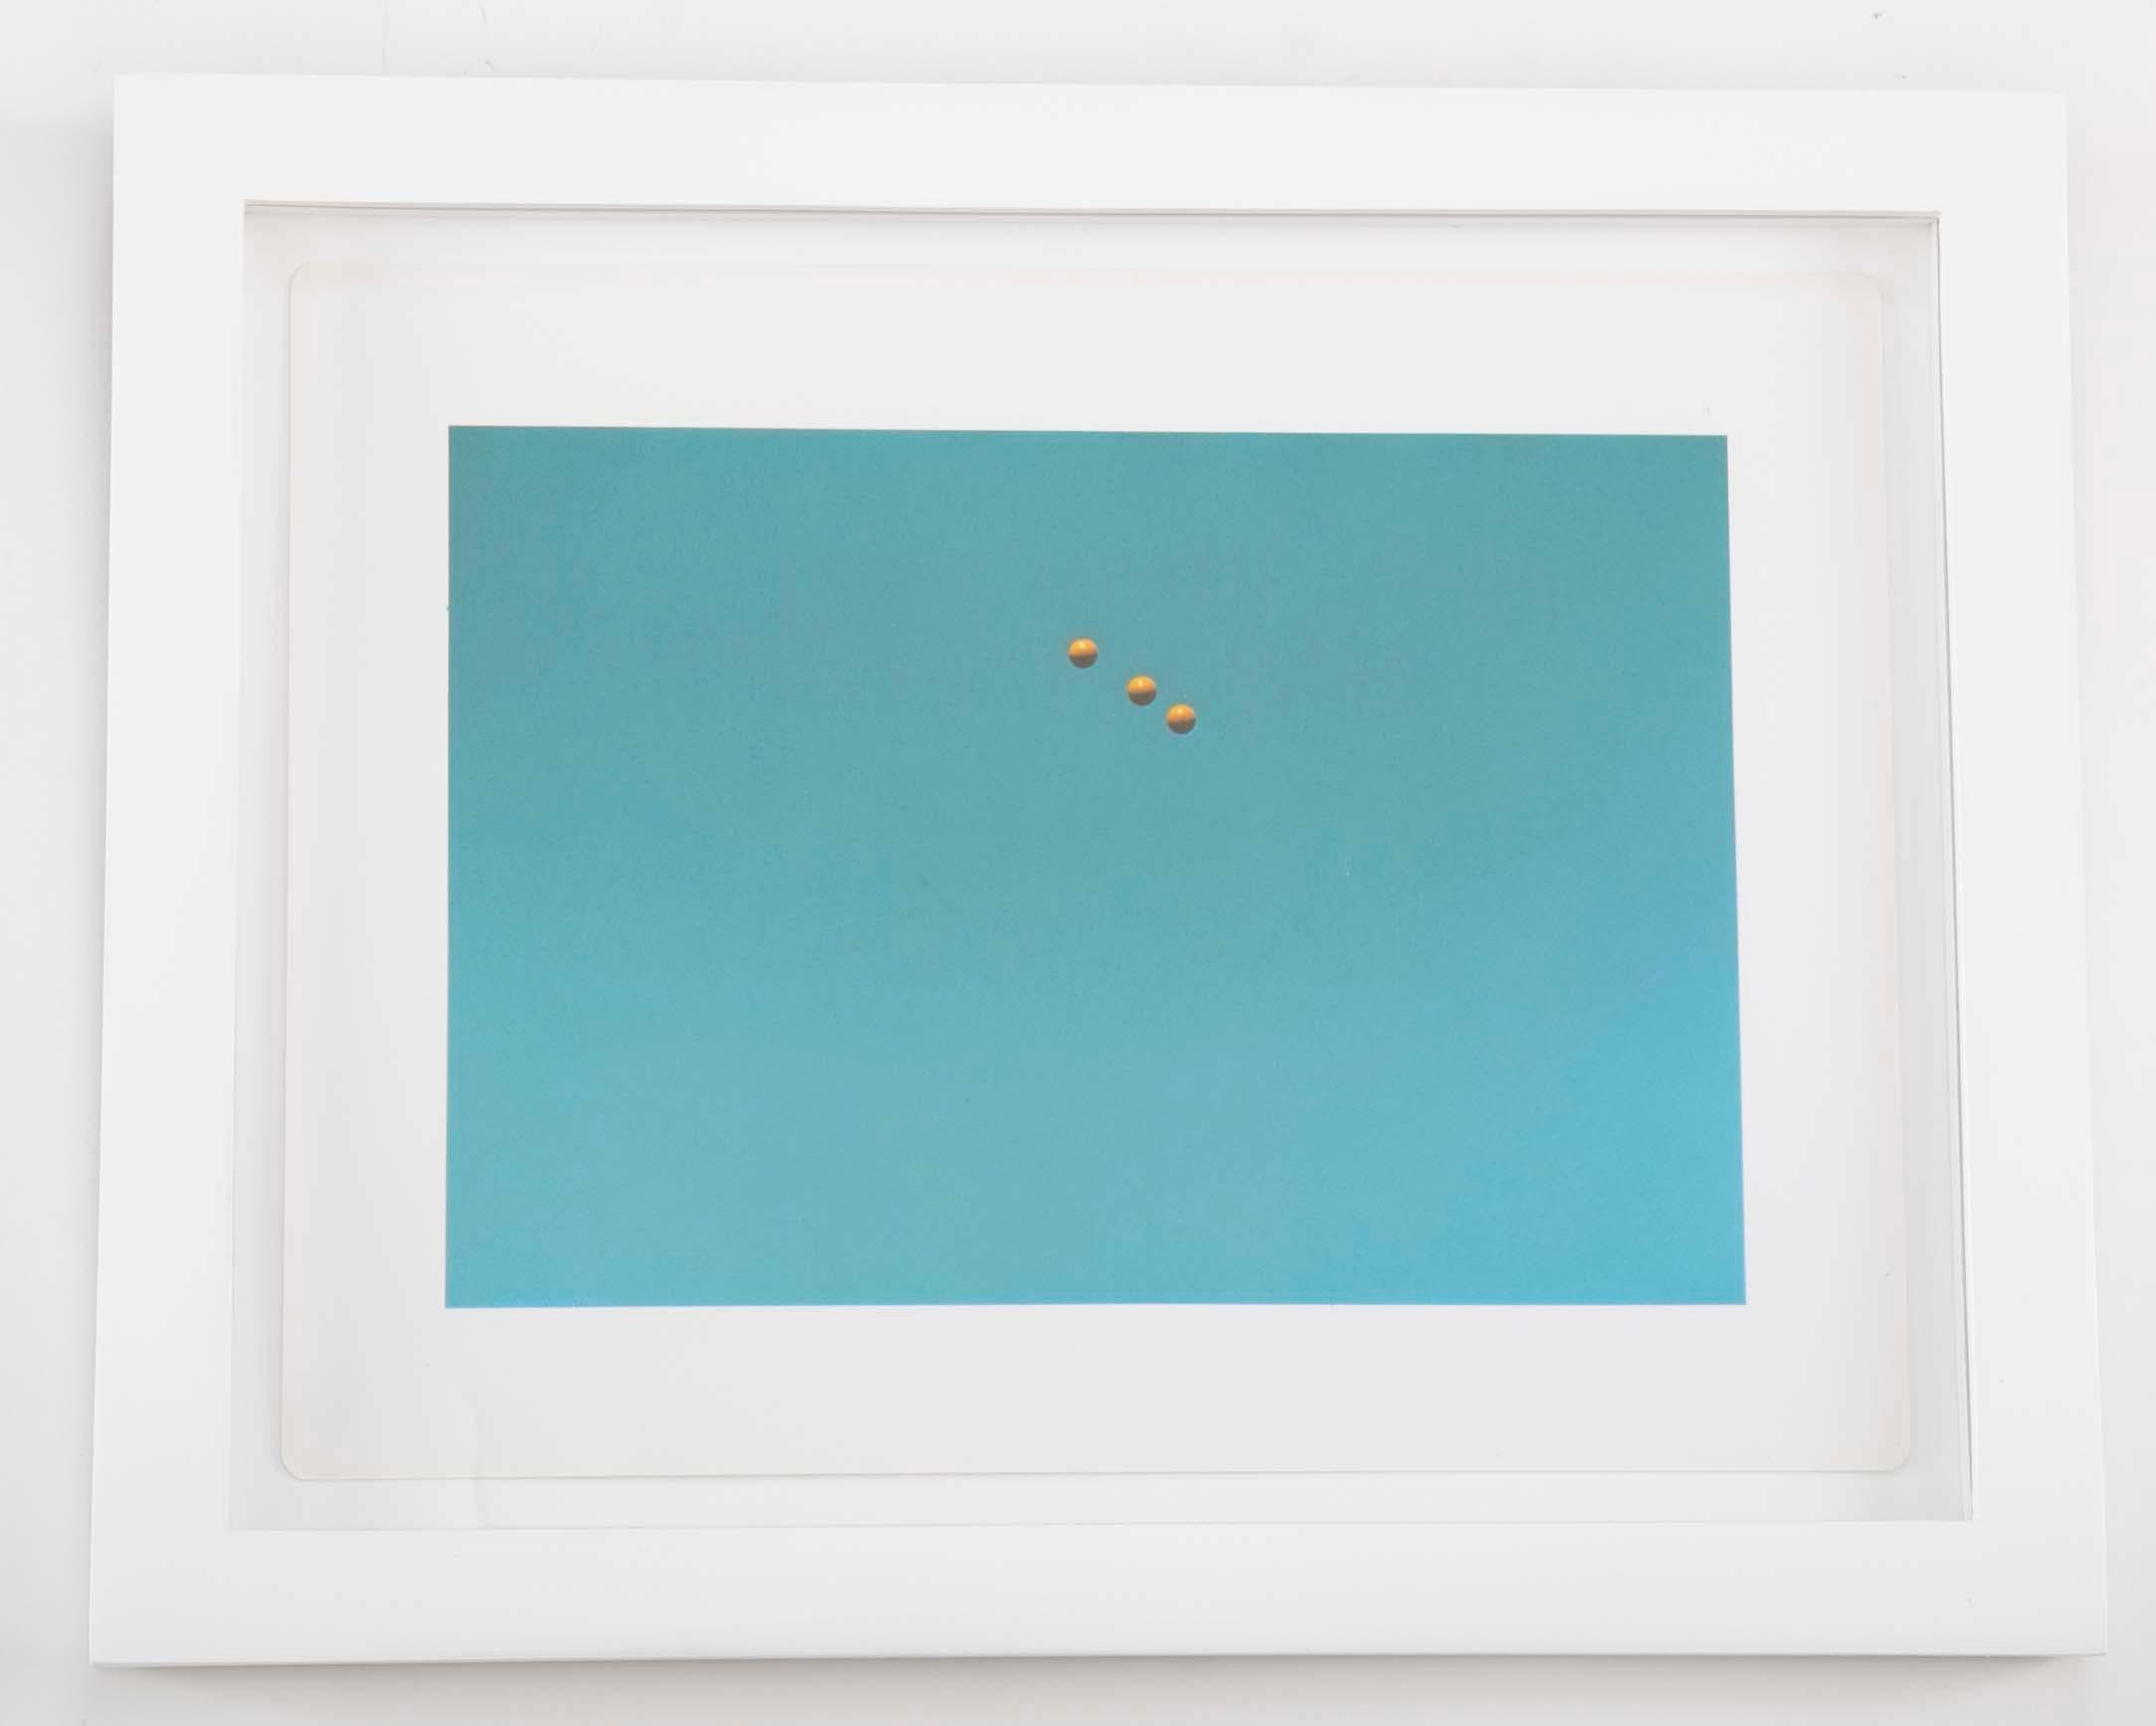 Paper John Baldessari Throwing Three Balls in the Air to Get a Straight Line, 1973